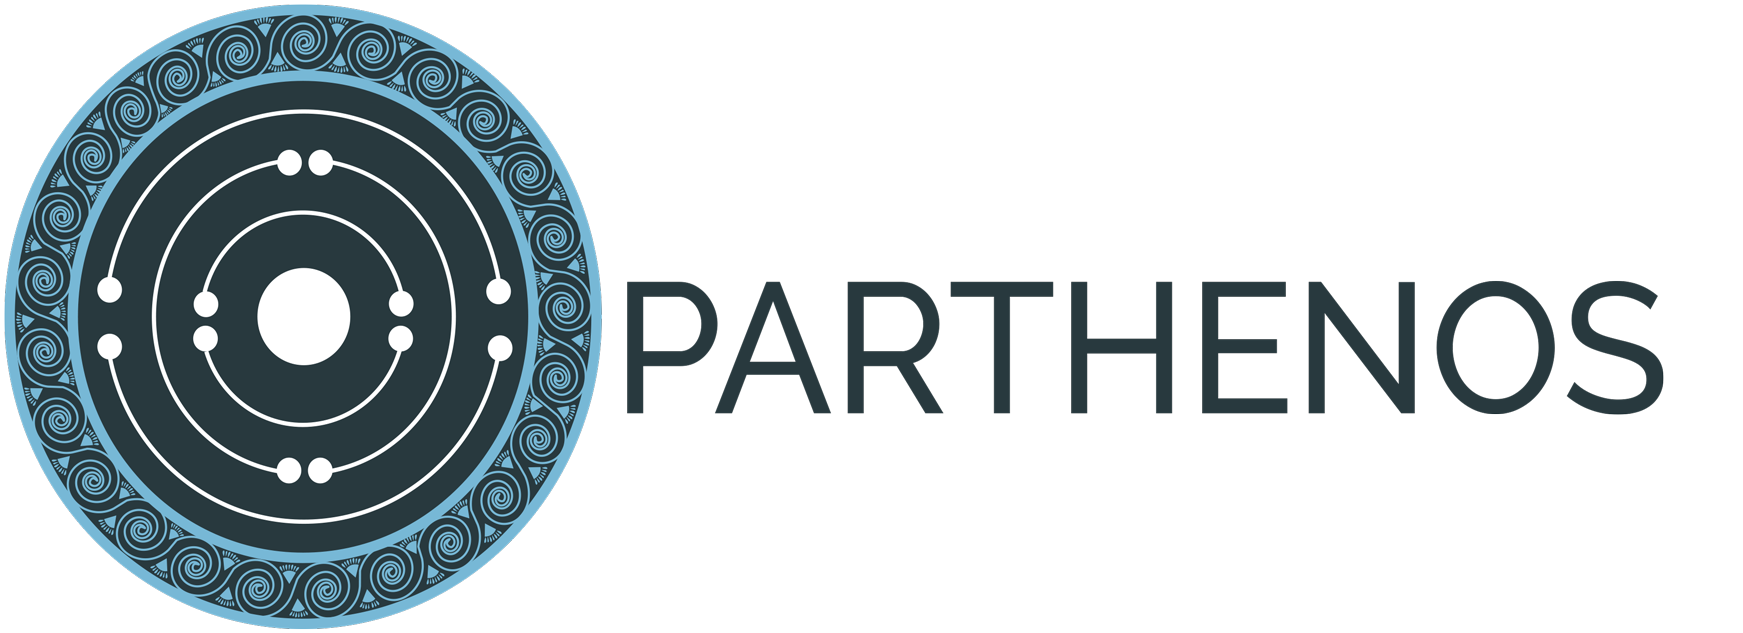 Logo of Parthenos Project